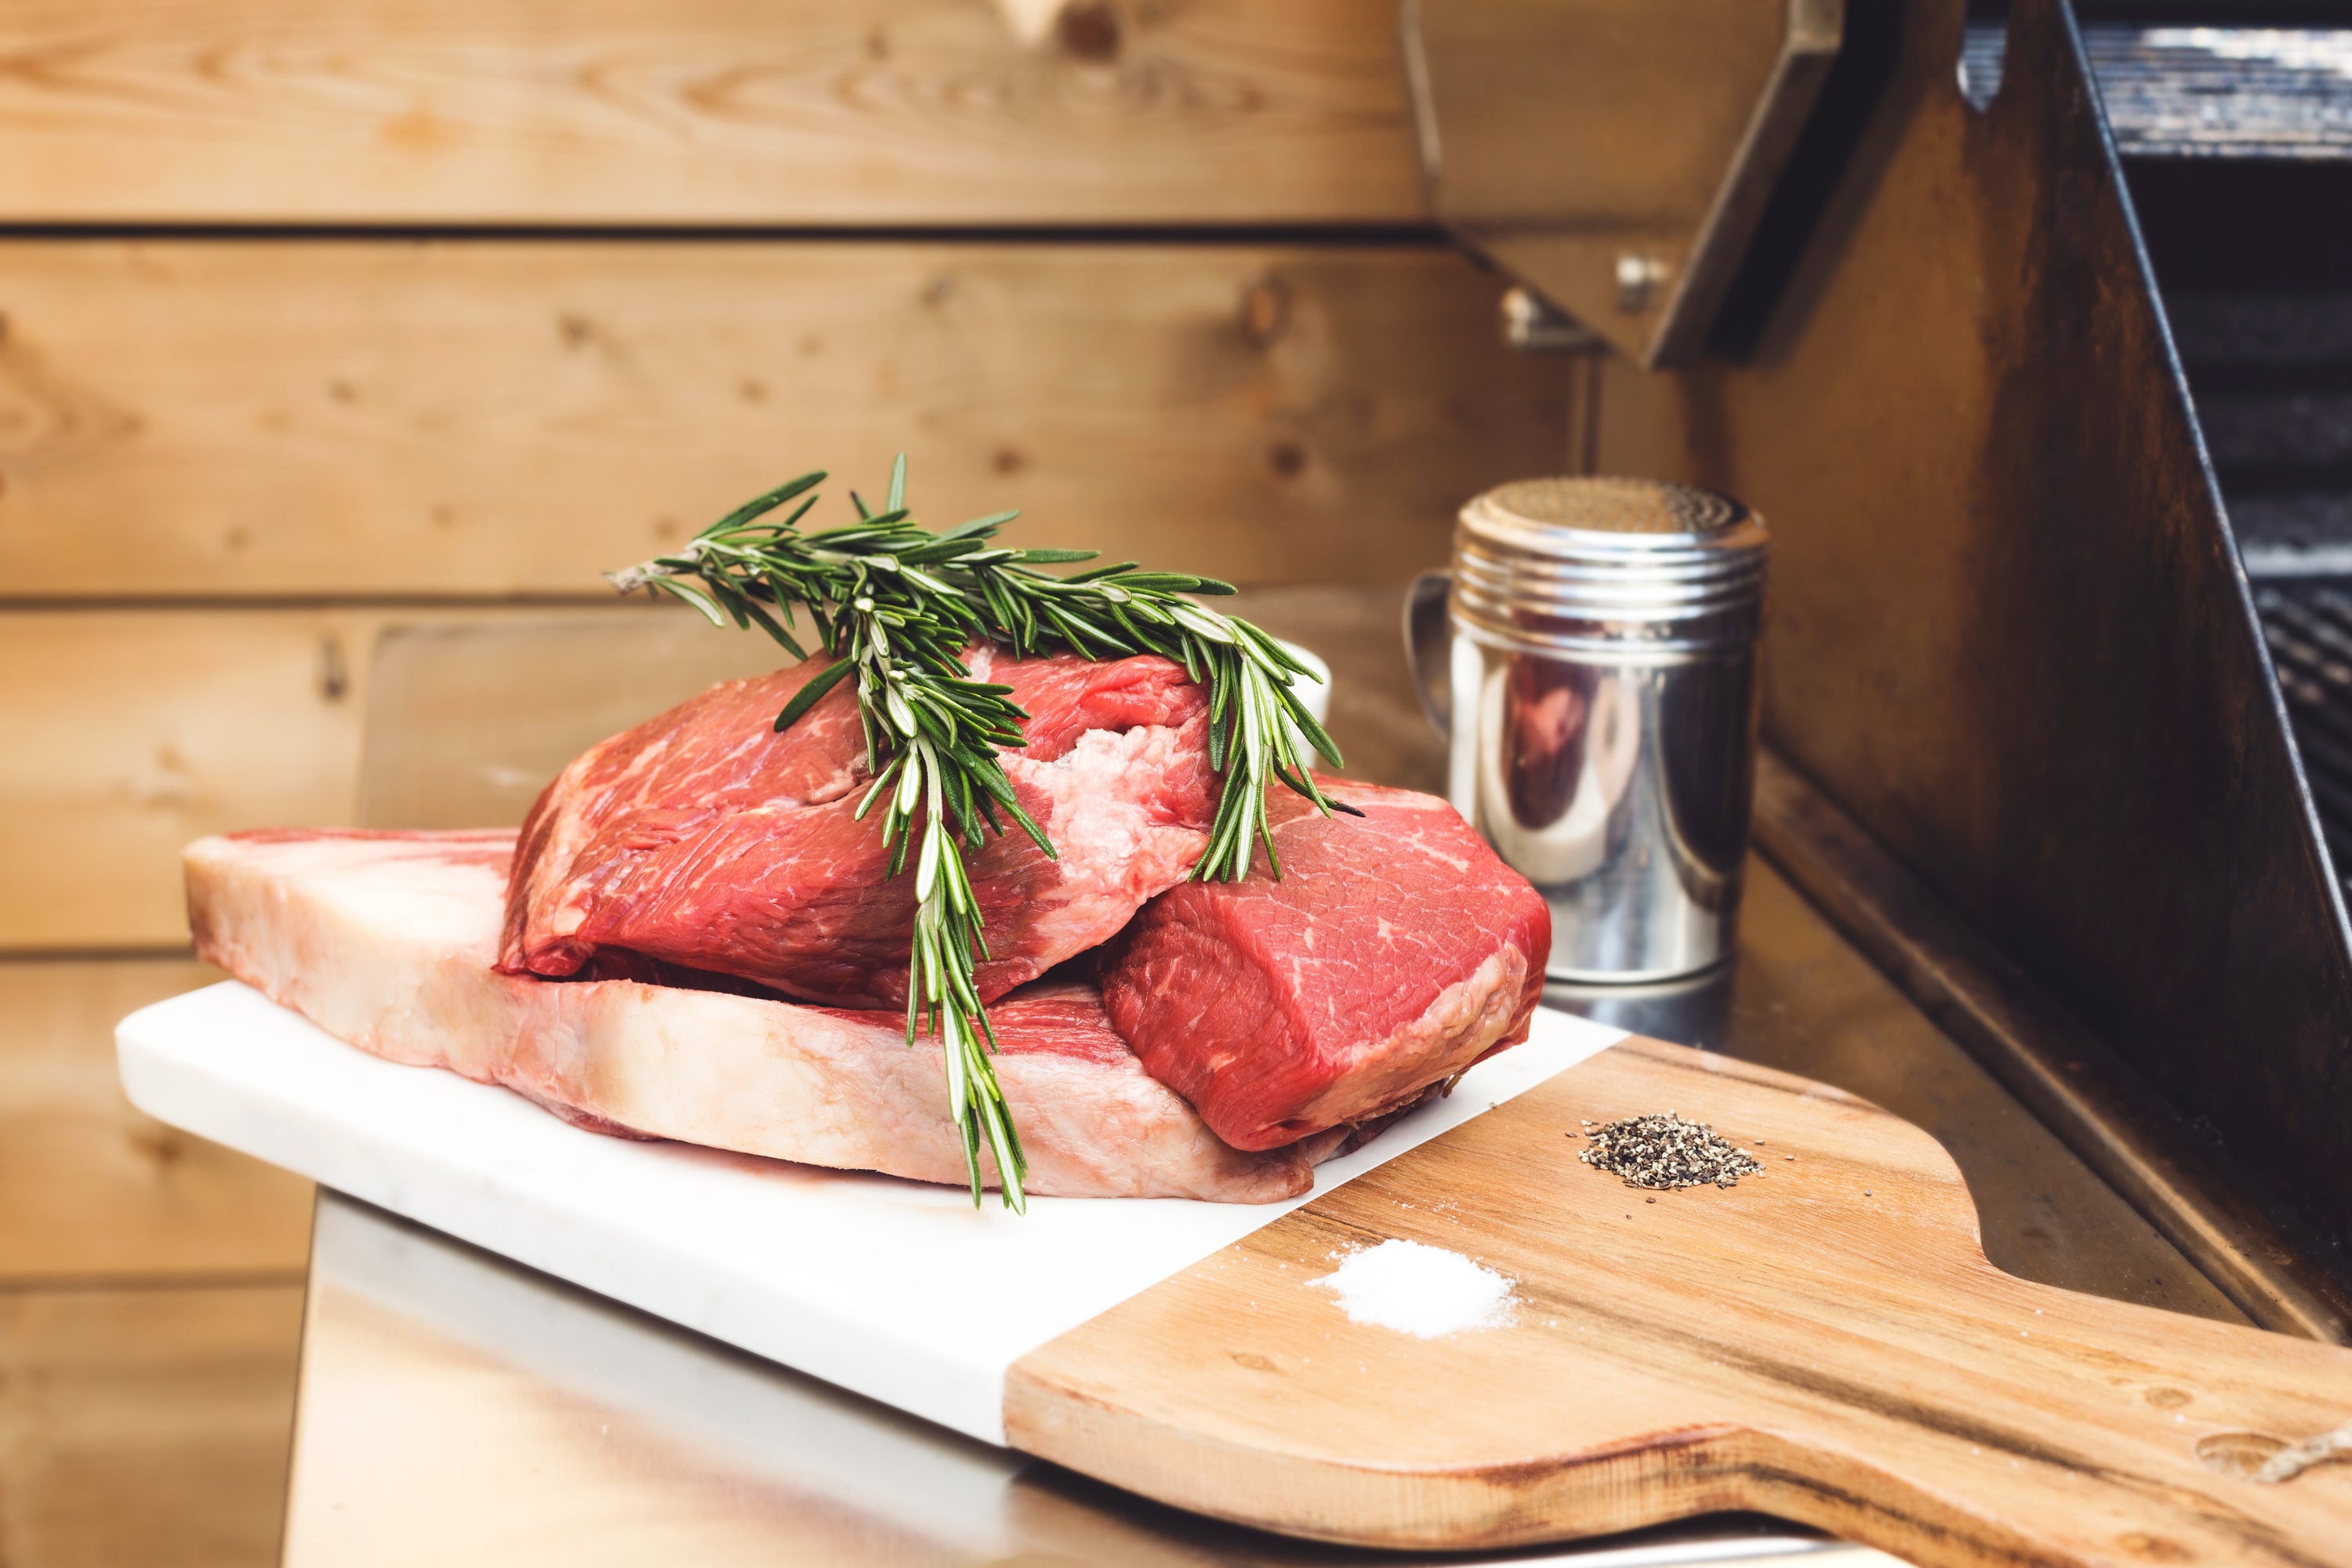 Grain Fed, Grass Fed & Grass Finished Beef, what does it all mean?